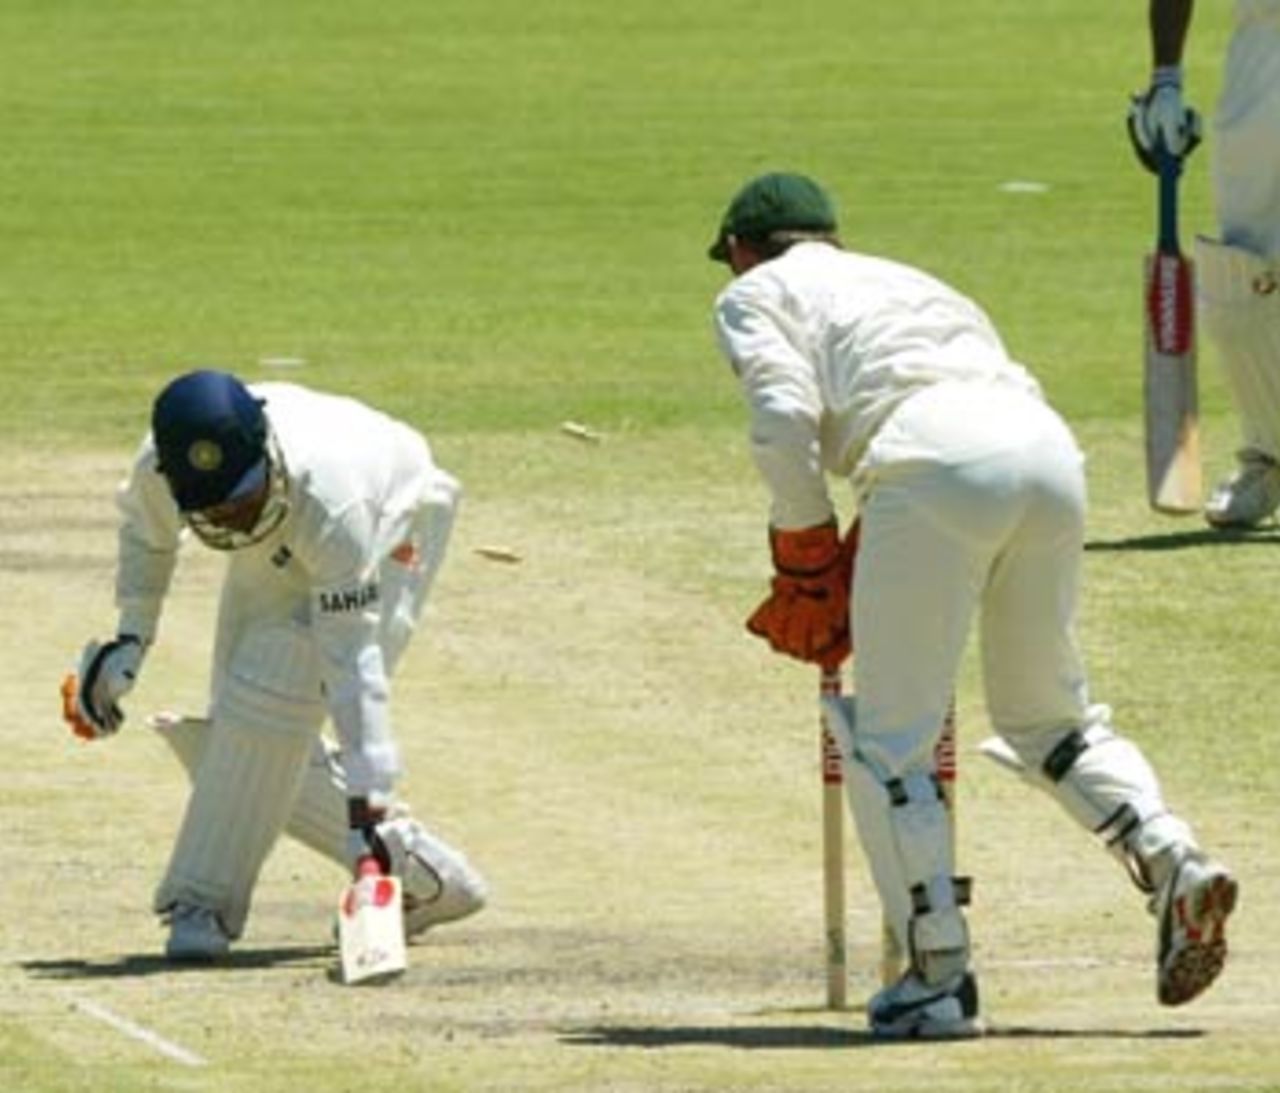 After some bold strokes Sehwag loses his wicket to a rush of blood, Australia v India, 2nd Test, Adelaide, 5th day, December 16, 2003